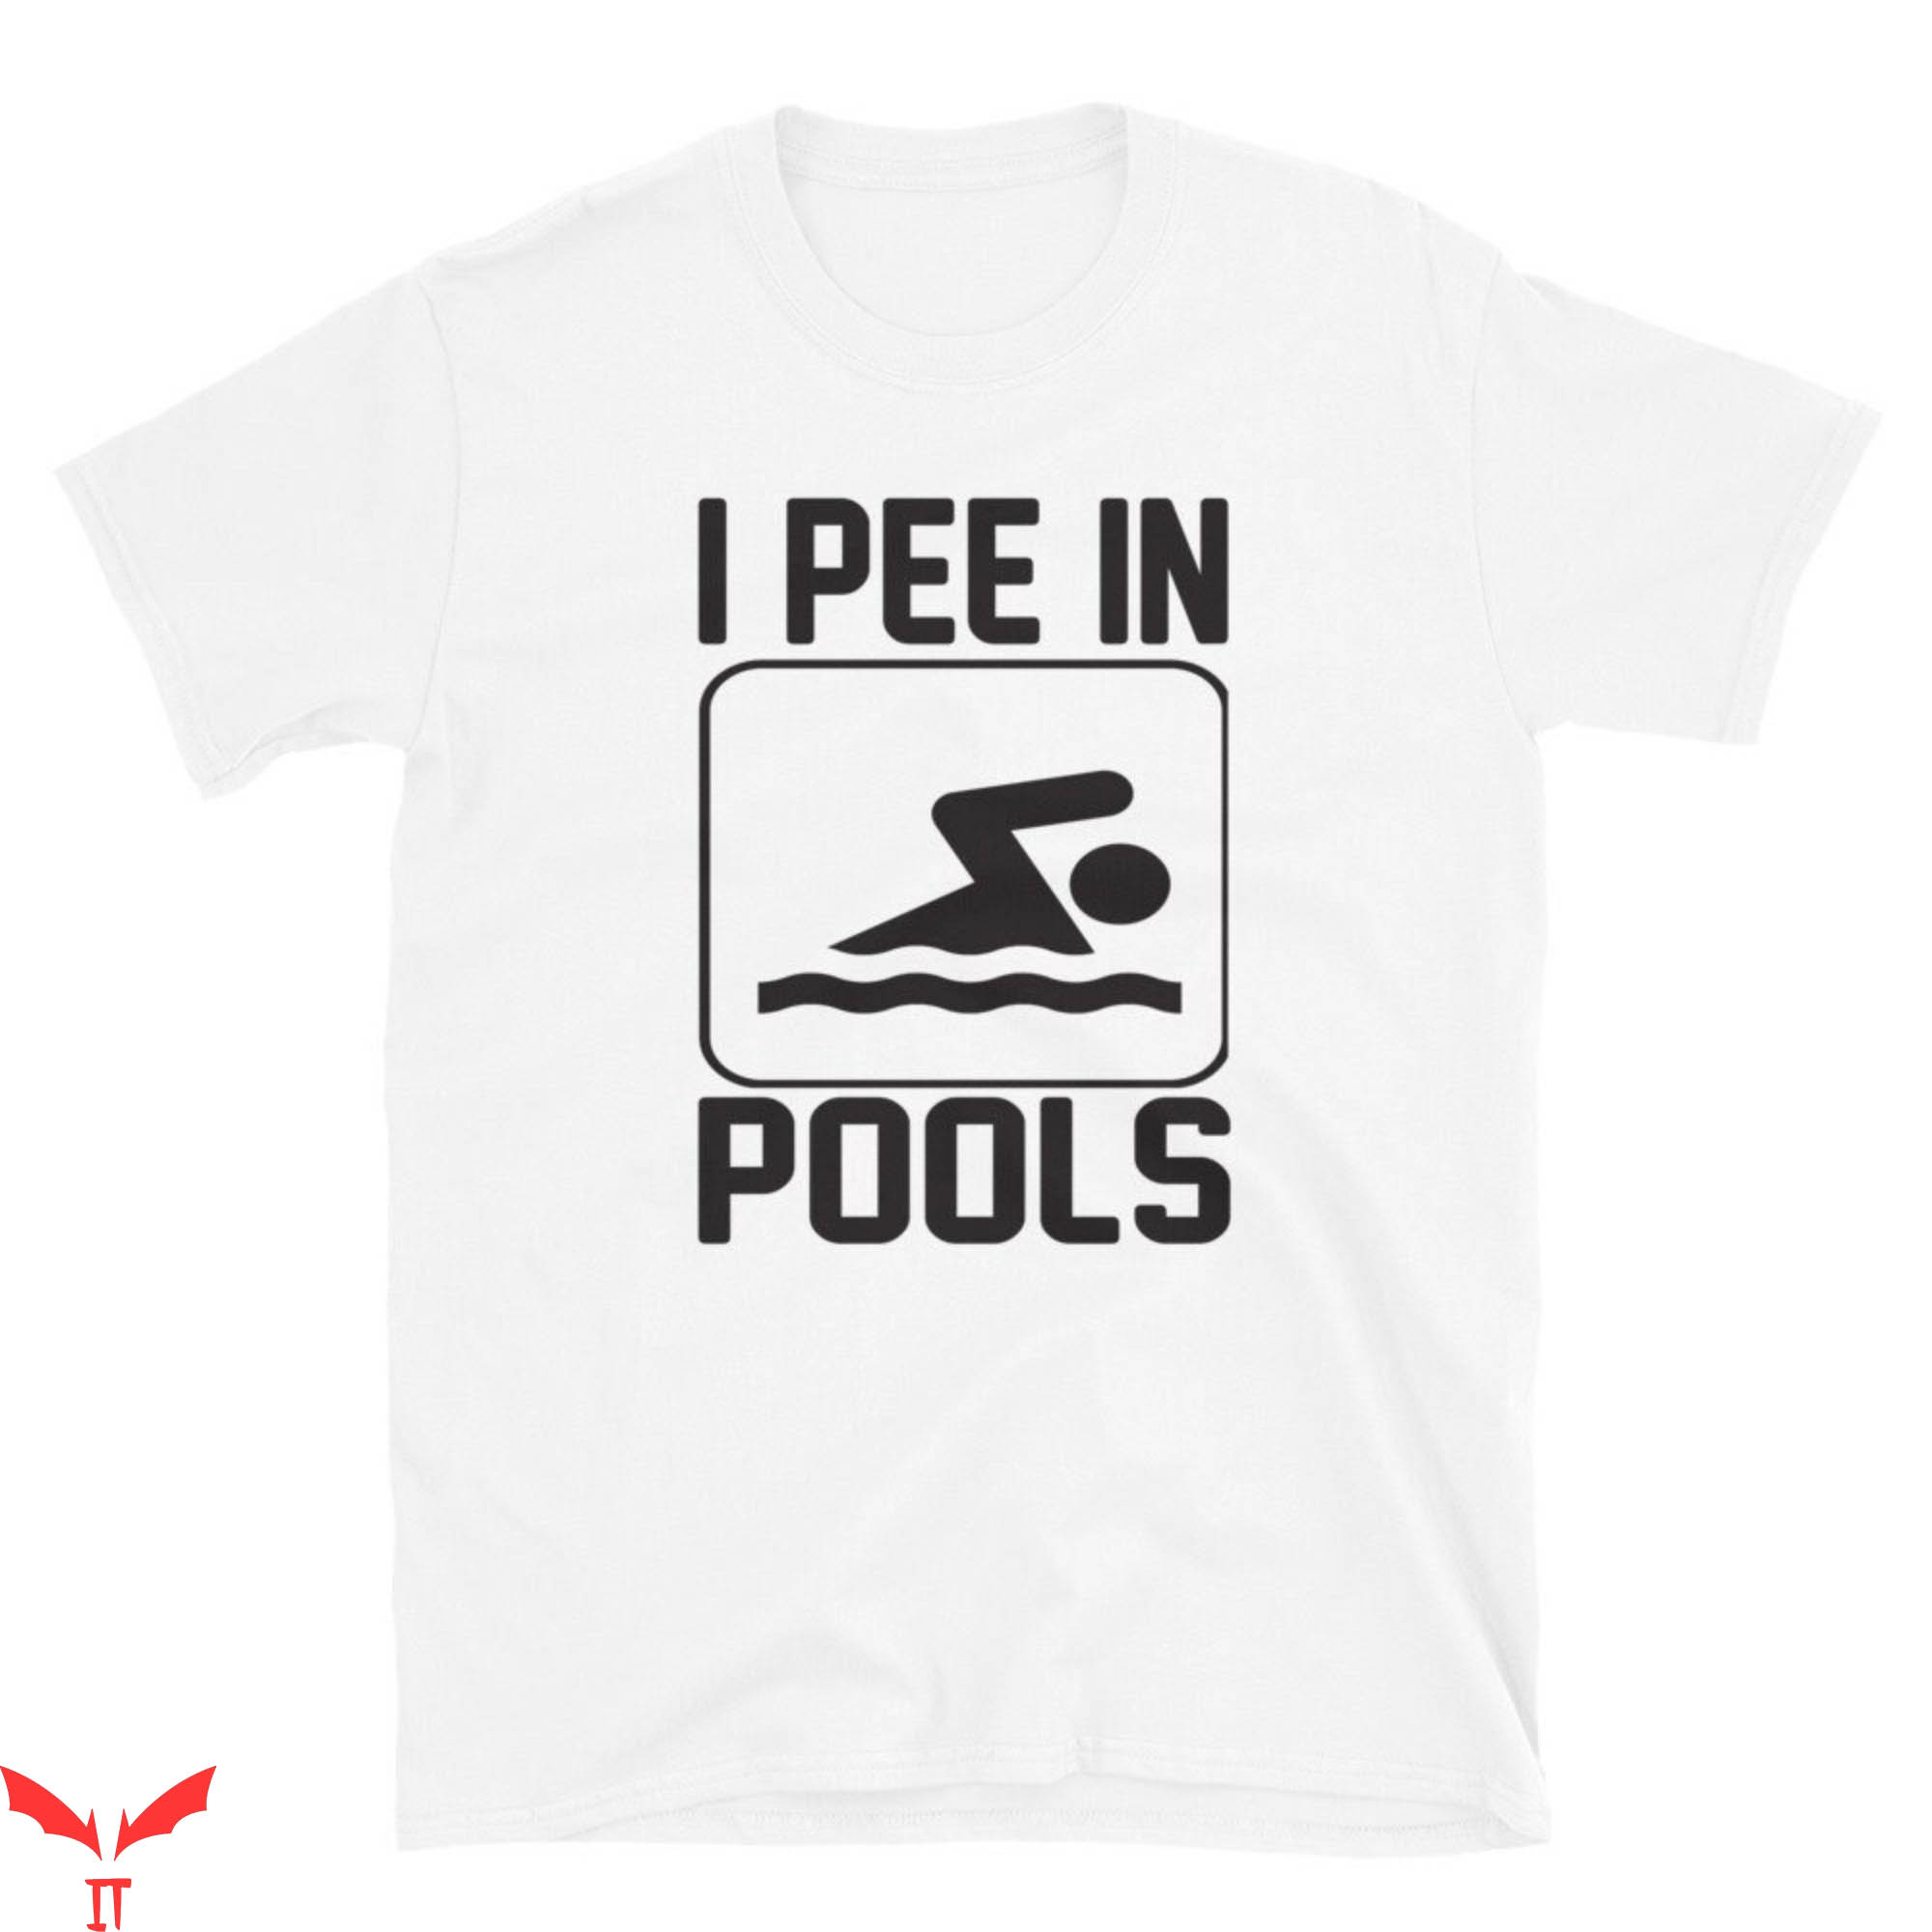 I Pee In Pools T-Shirt Funny Meme Cool Style Tee Shirt